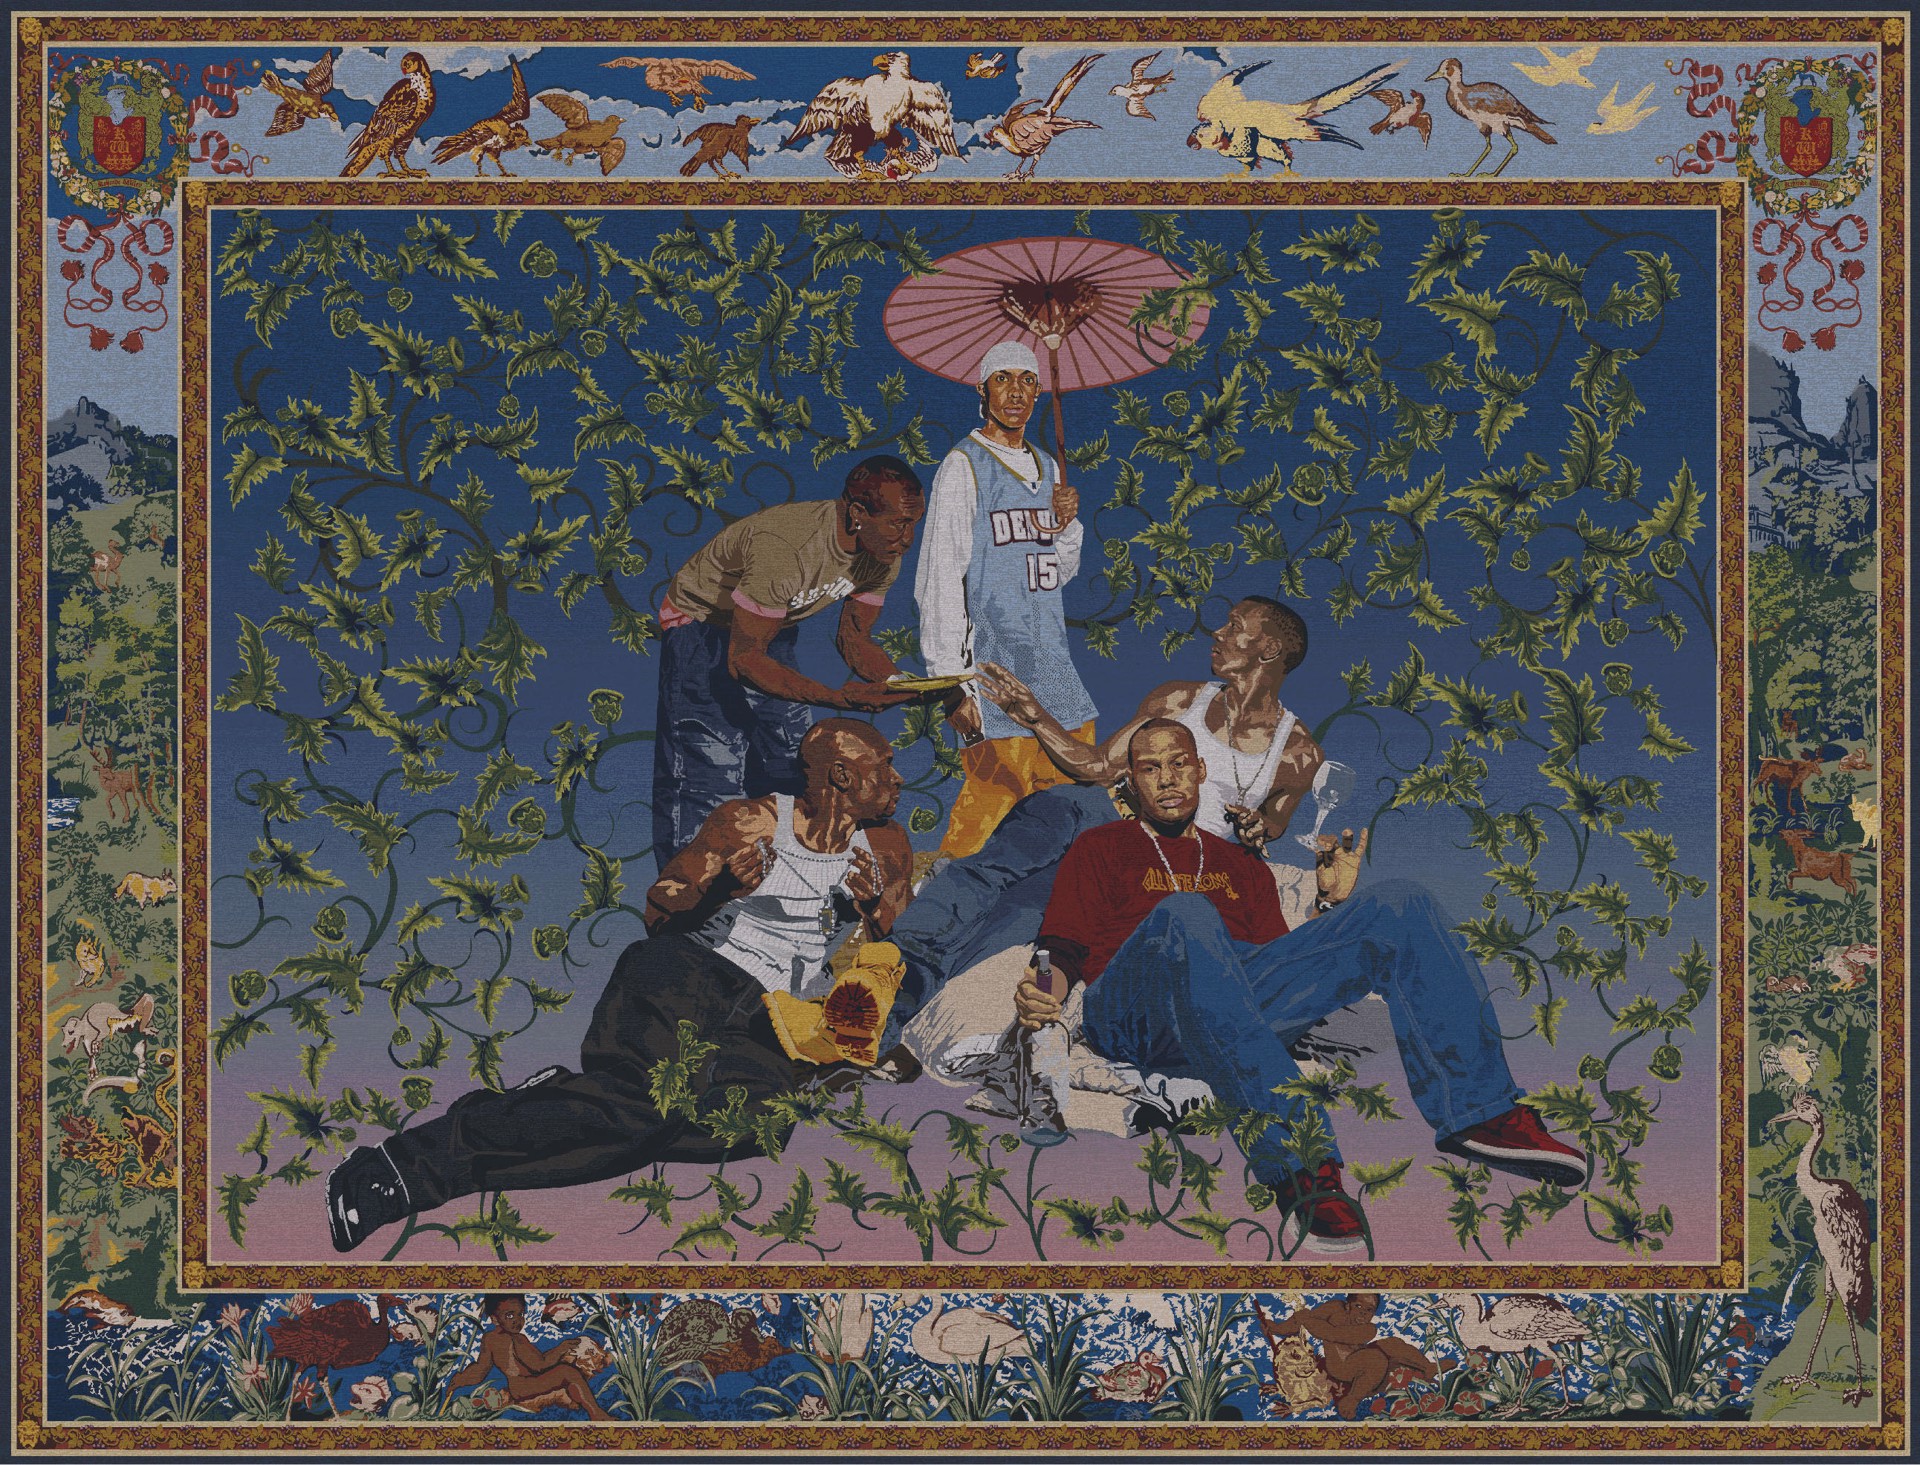 The Gypsy Fortune -Teller by Kehinde Wiley